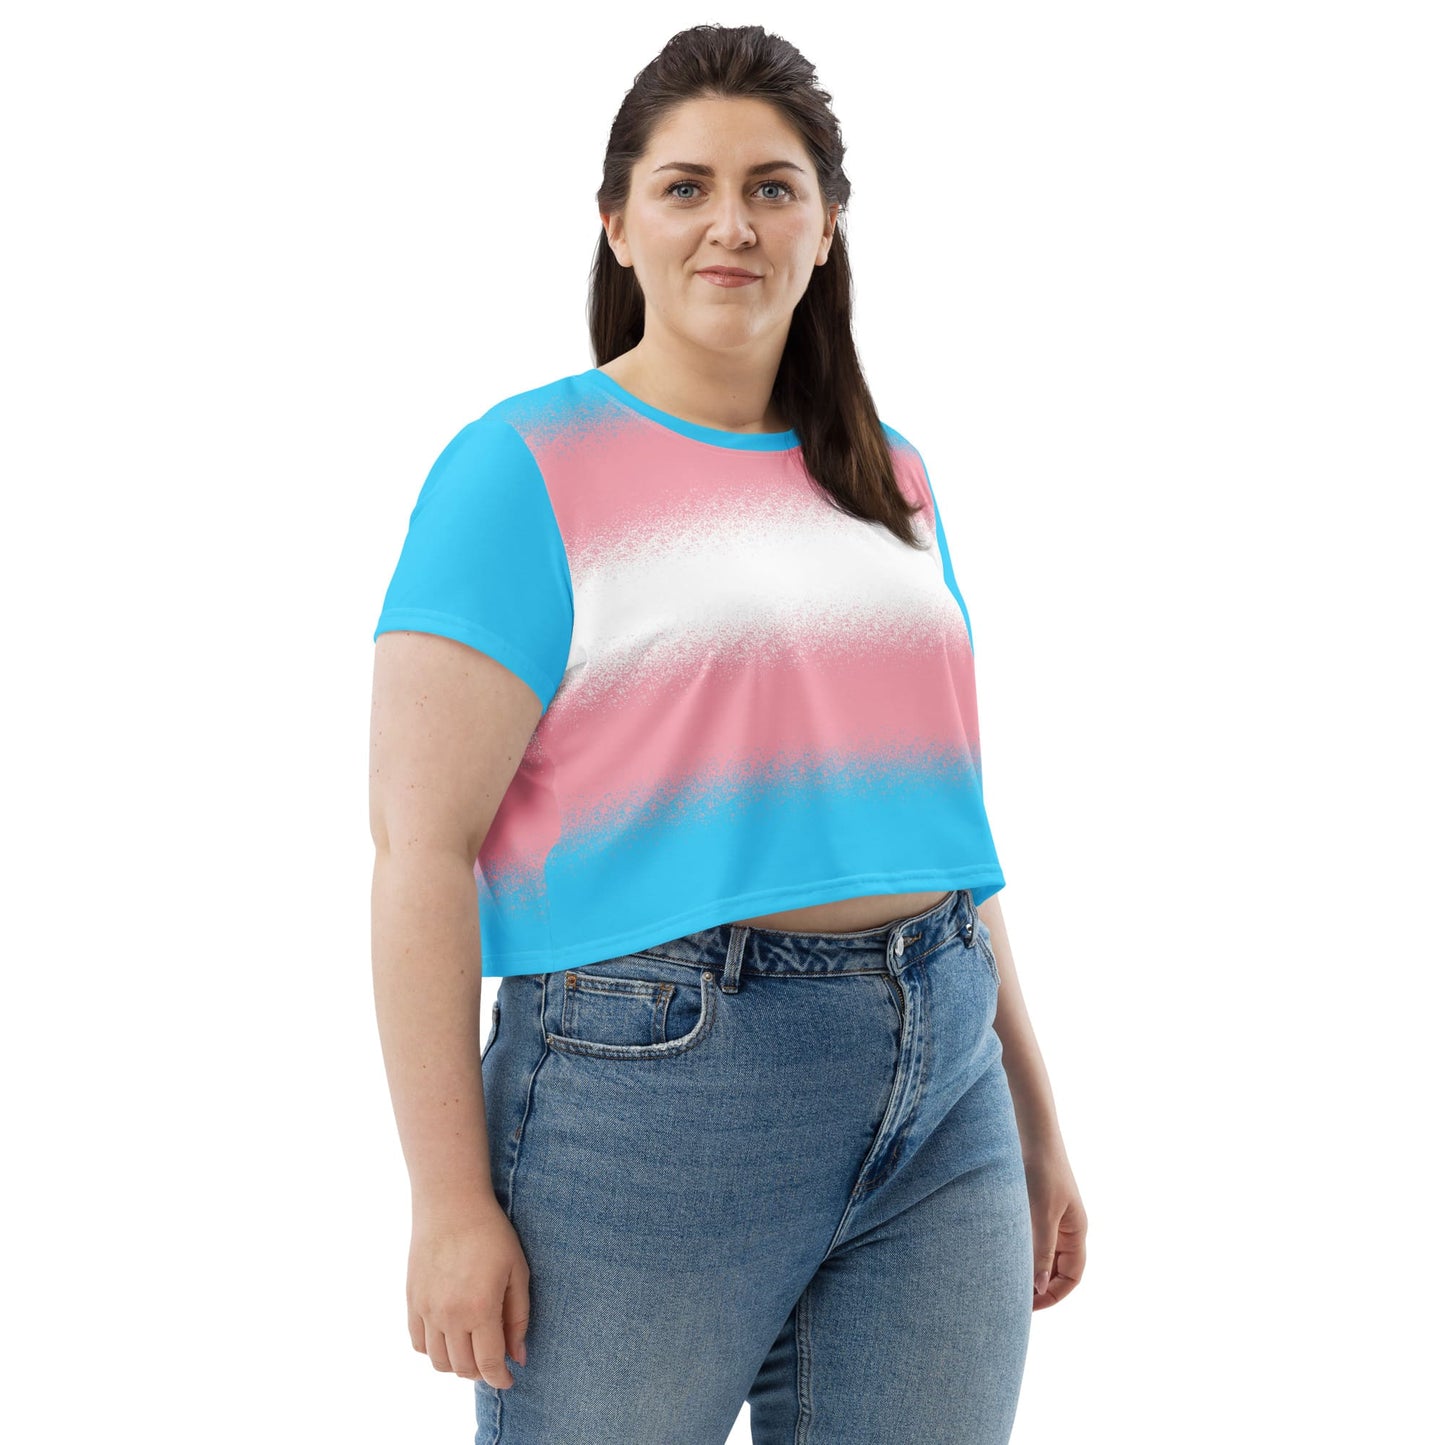 transgender crop top, trans pride cropped shirt with wings on the back, left